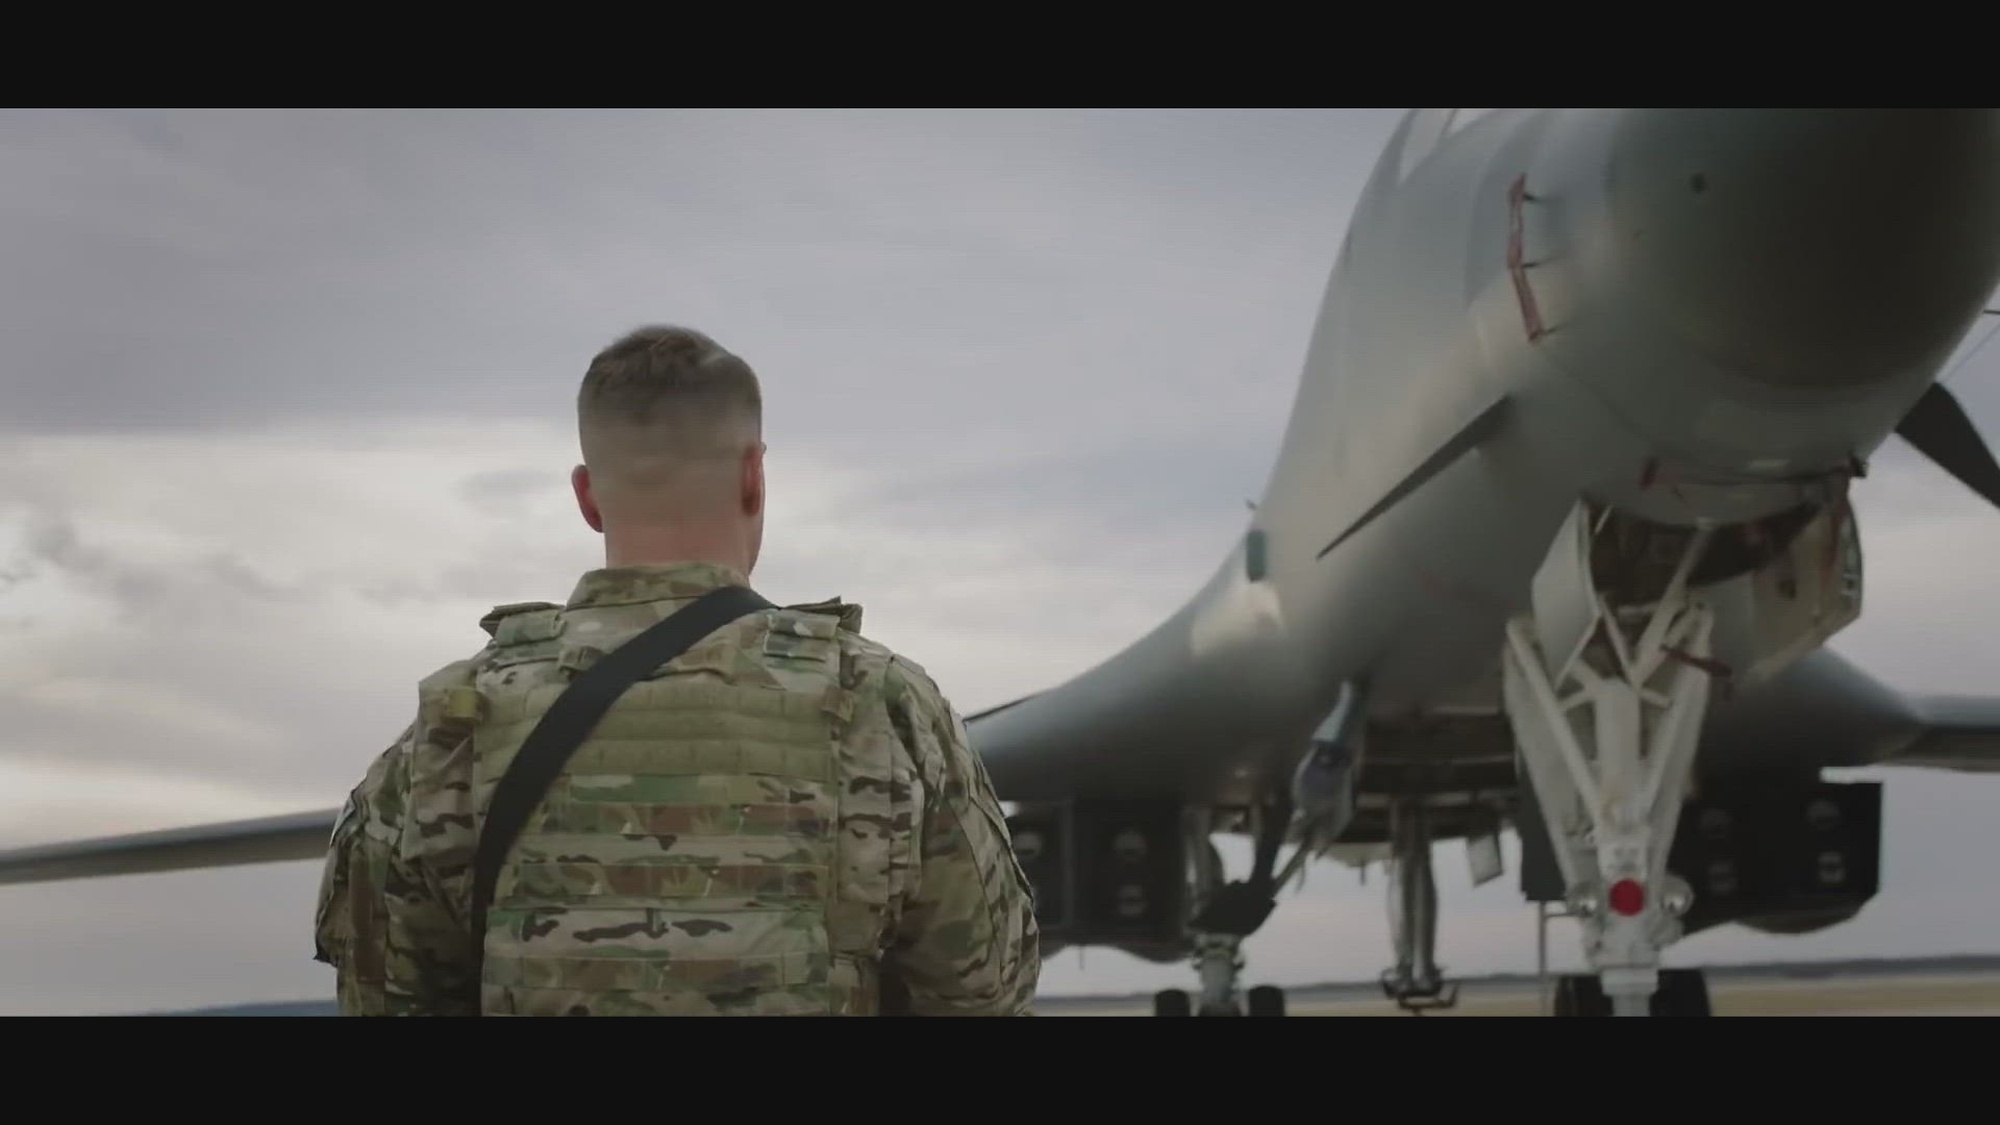 A video to enlighten the audience in the role of Airman Leadership School in developing future enlisted Airmen to become future leaders who can exhibit the core values, communicate effectively, collaborate with others and apply strategies to problem solving.